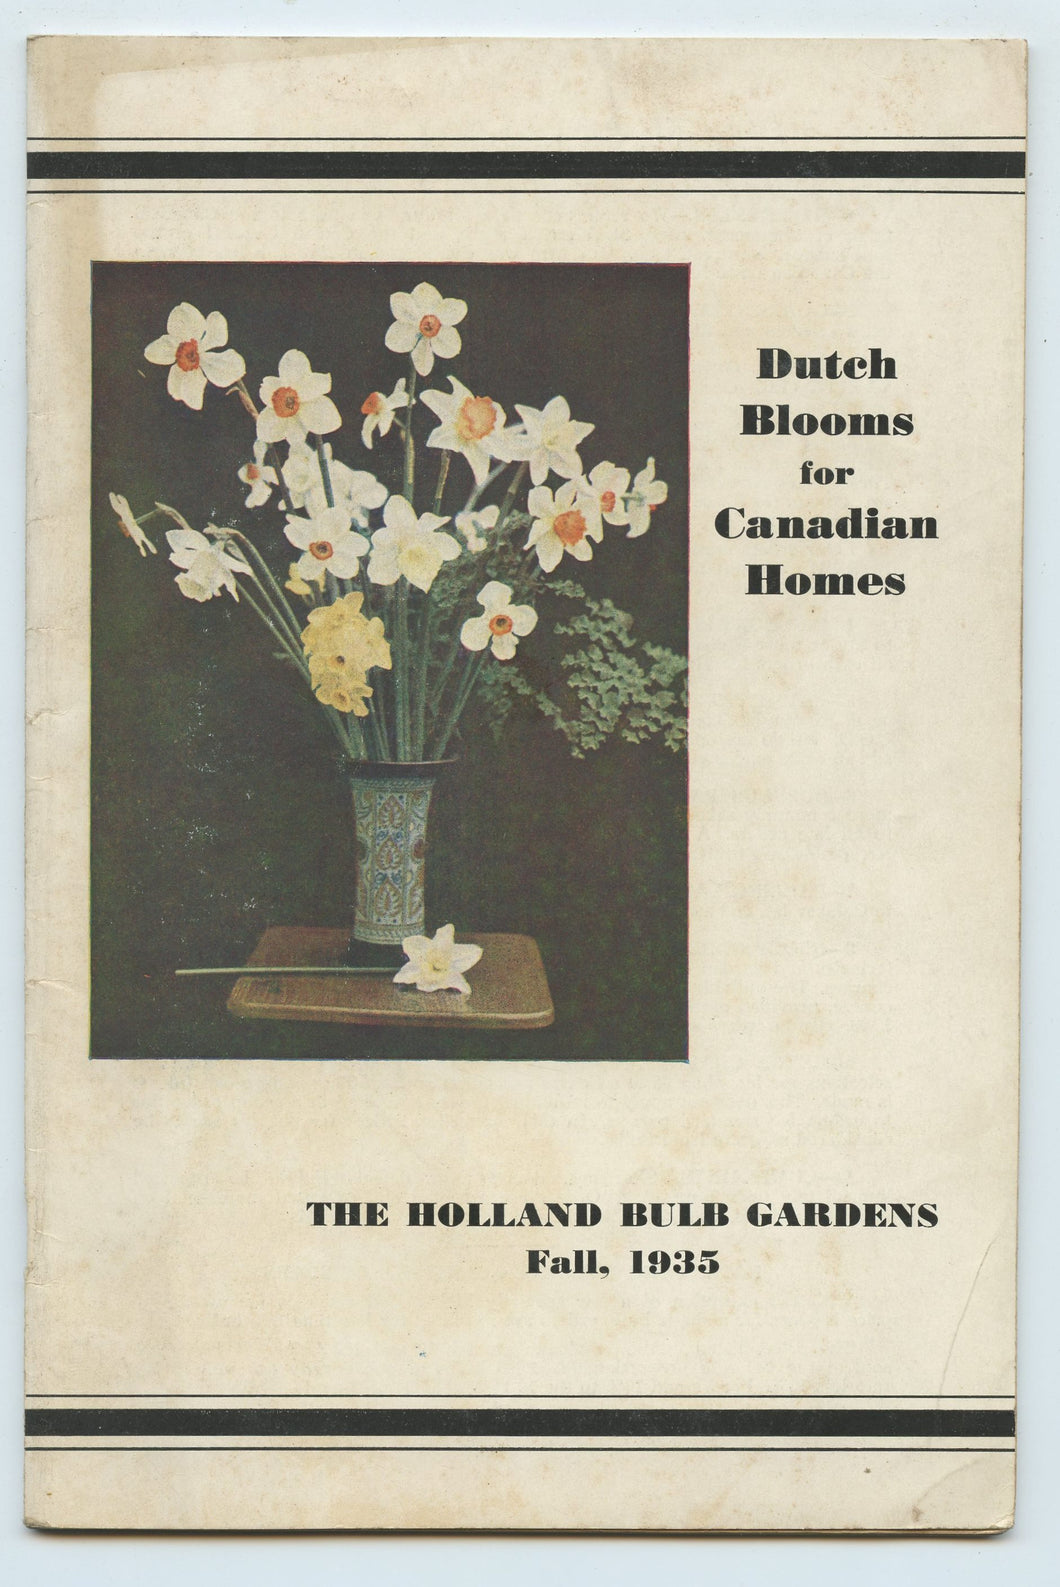 Dutch Blooms for Canadian Homes